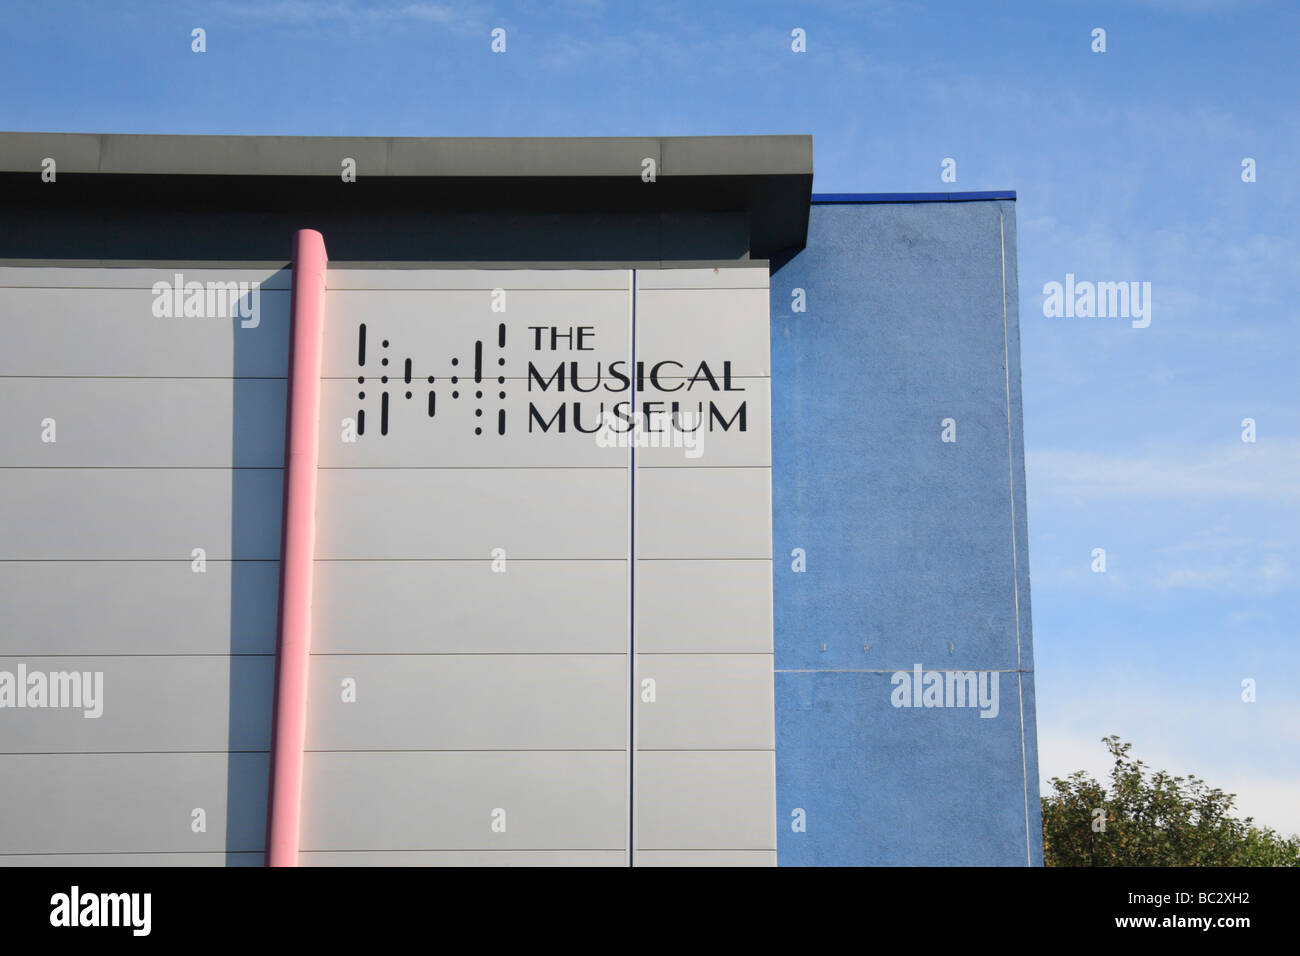 The brand new home to the Musical Museum in Brentford, London, England. Stock Photo